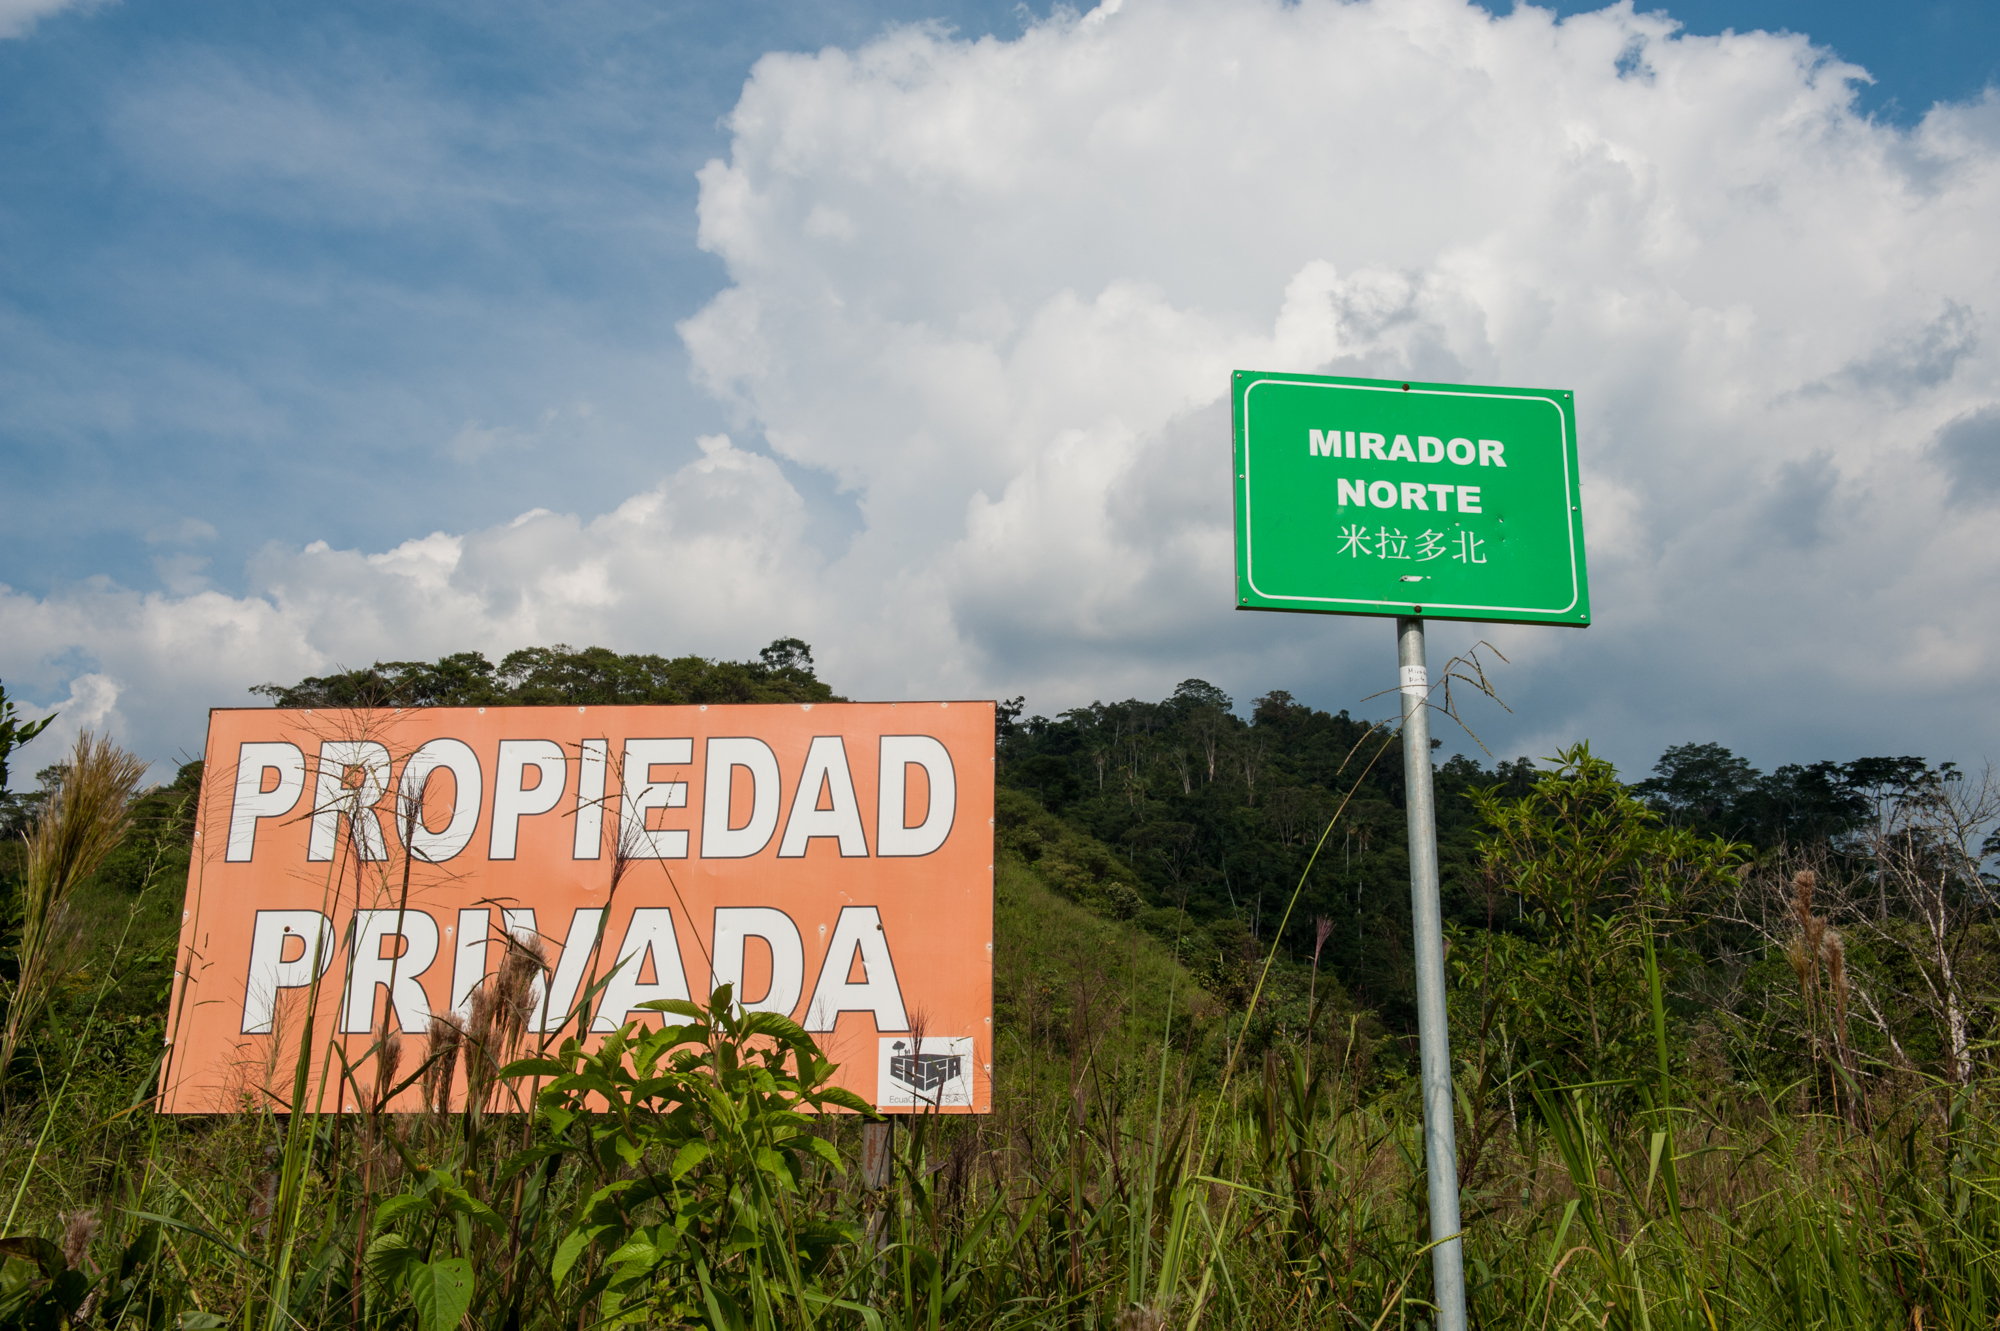 <p>The Mirador copper mining project in Ecuador&#8217;s richly biodiverse Cordillera del Condor is under the control of Chinese state-owned companies (Image by Acci&oacute;n Ecol&oacute;gica)</p>